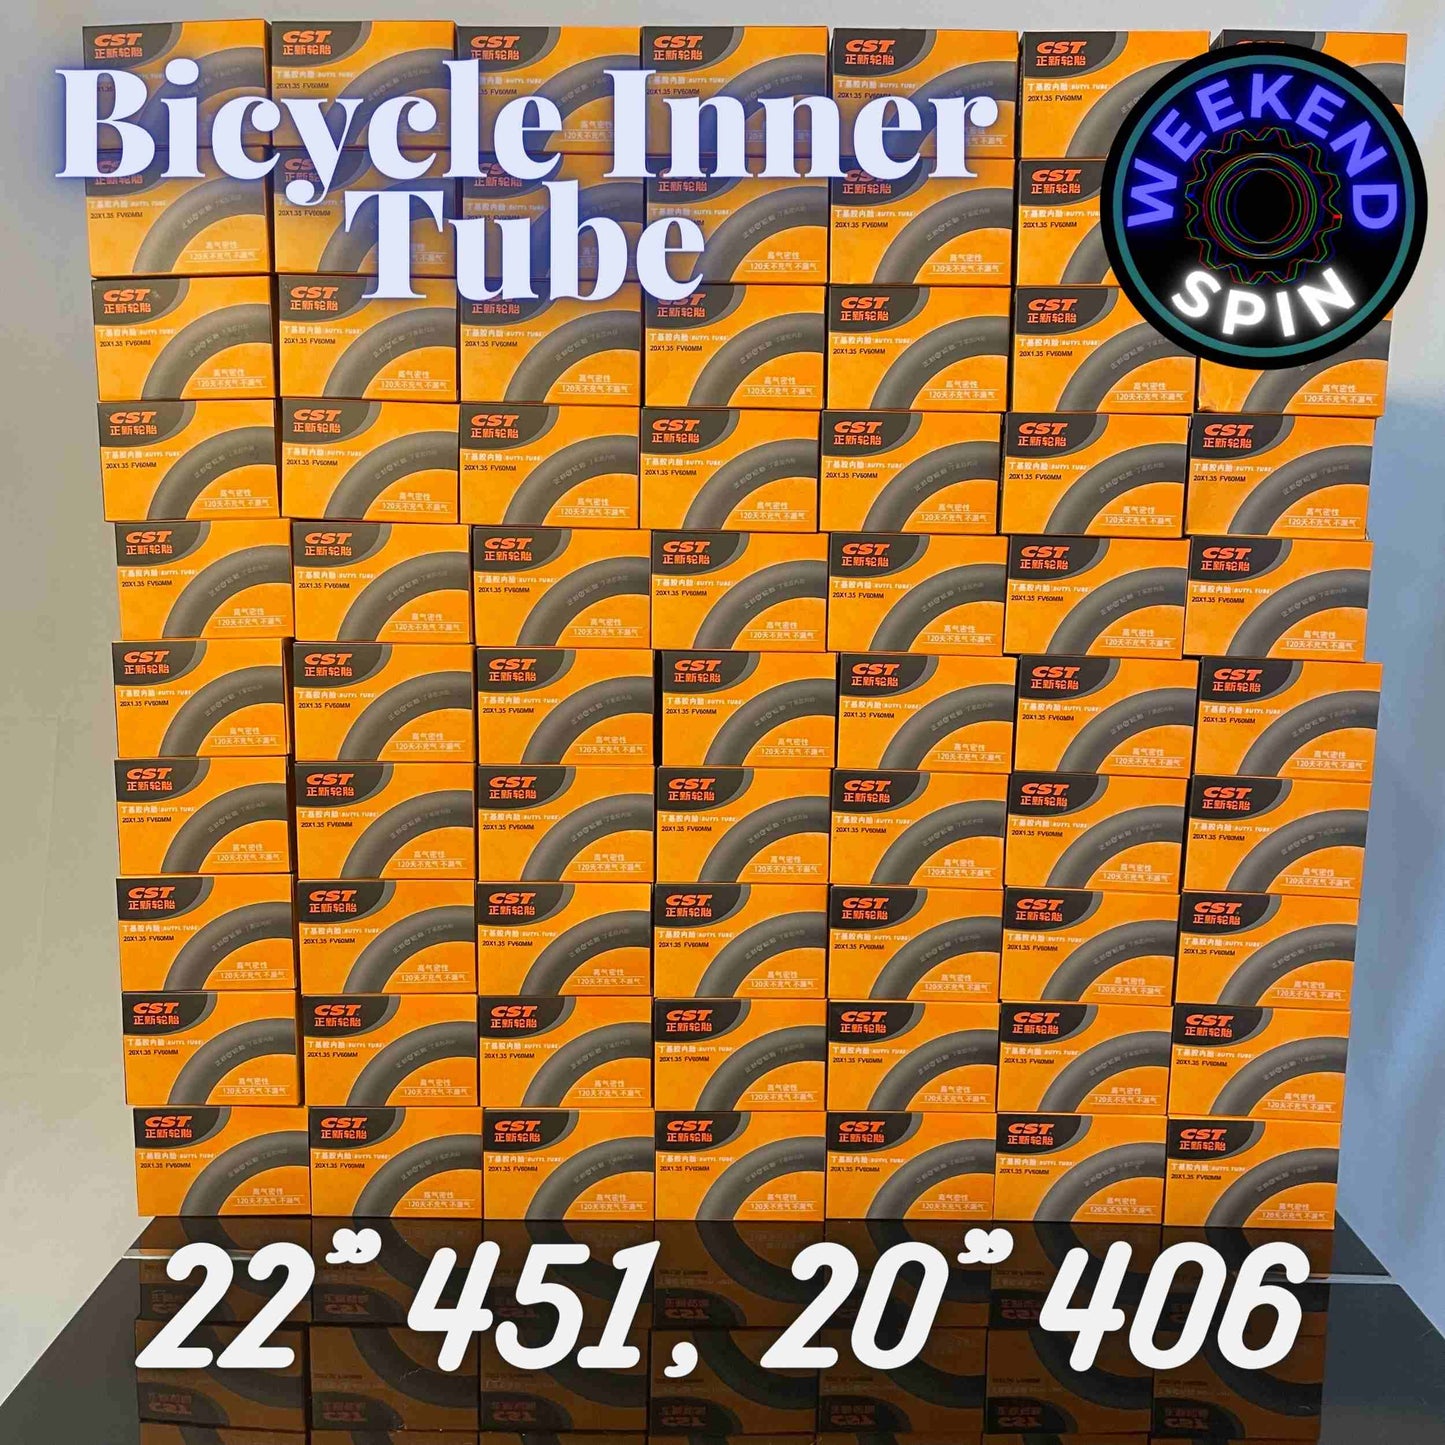 Inner Tube for Foldable BIcycle